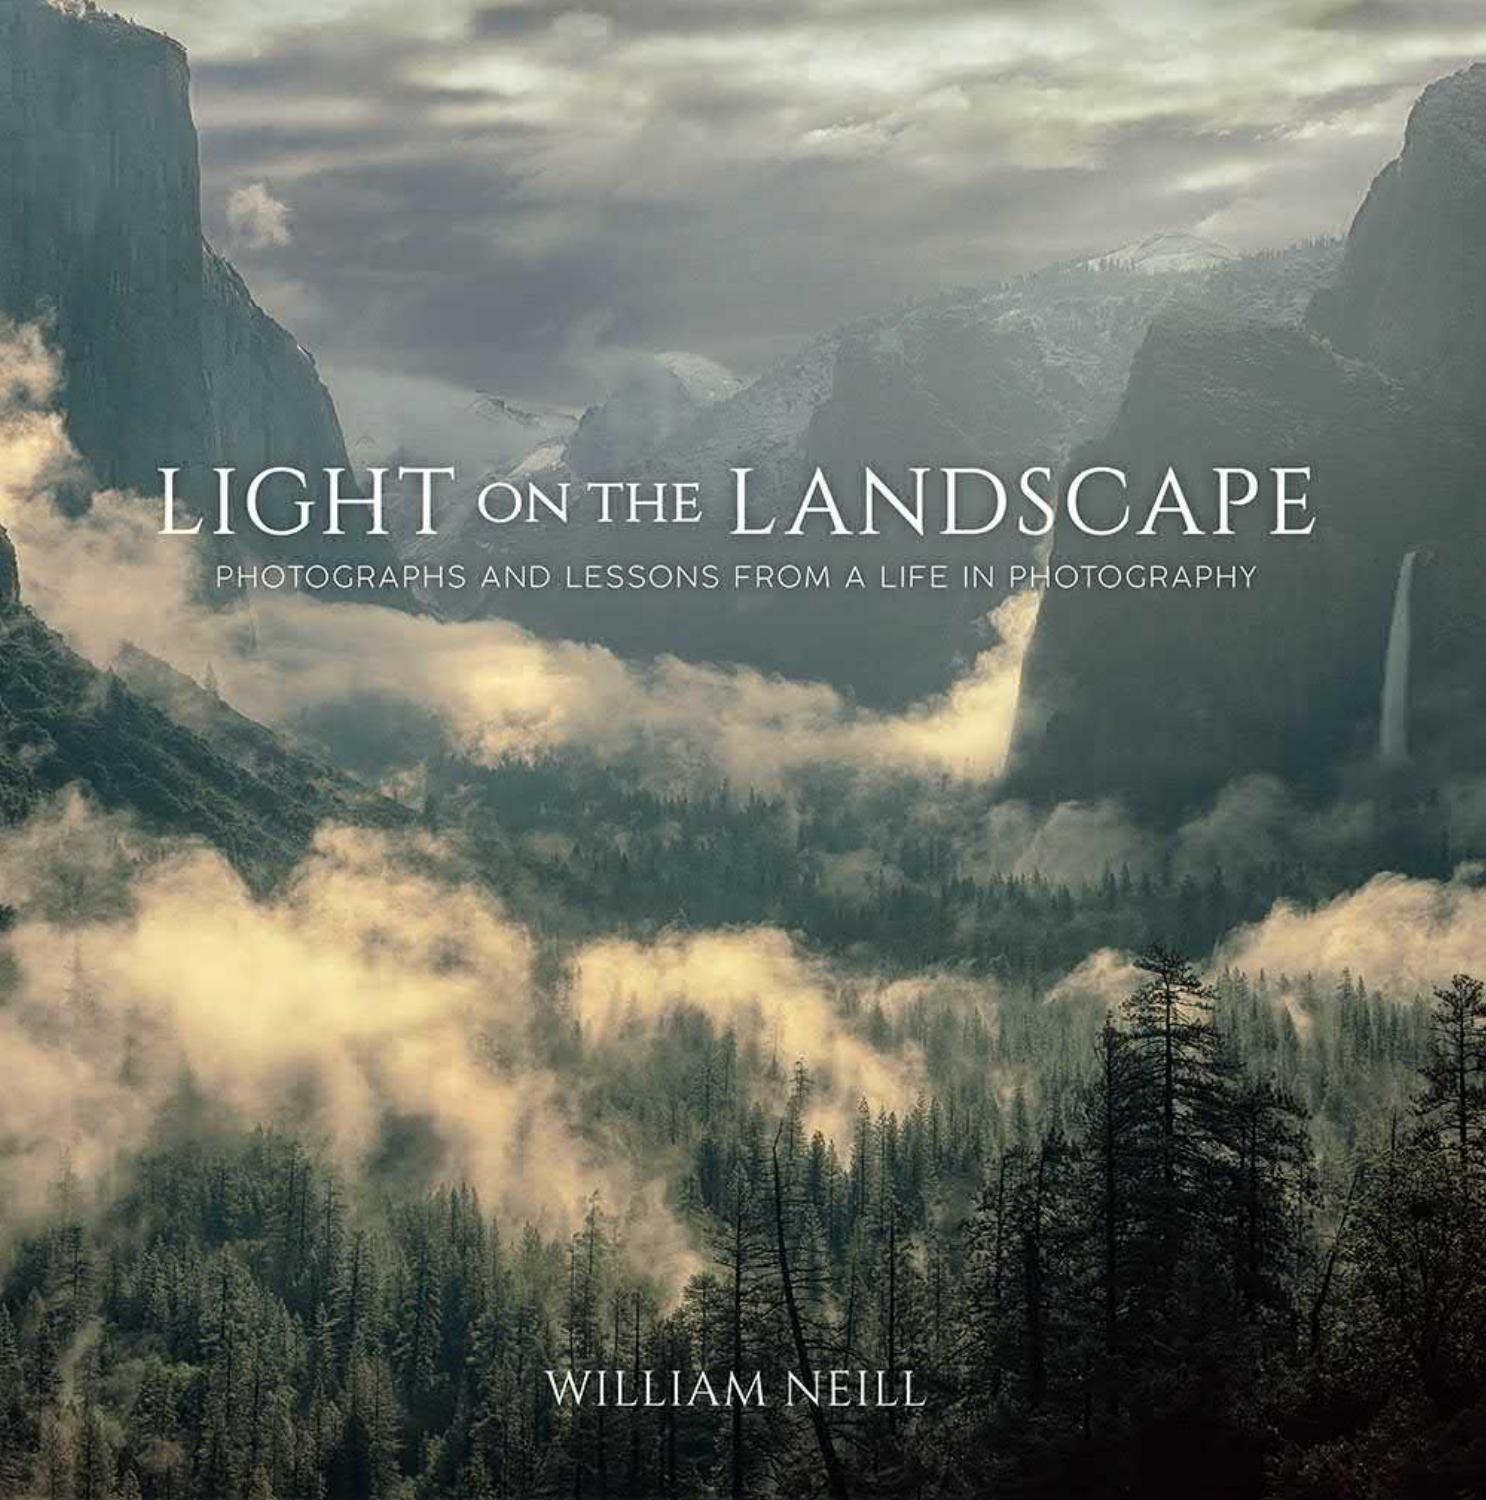 Light on the Landscape by William Neill